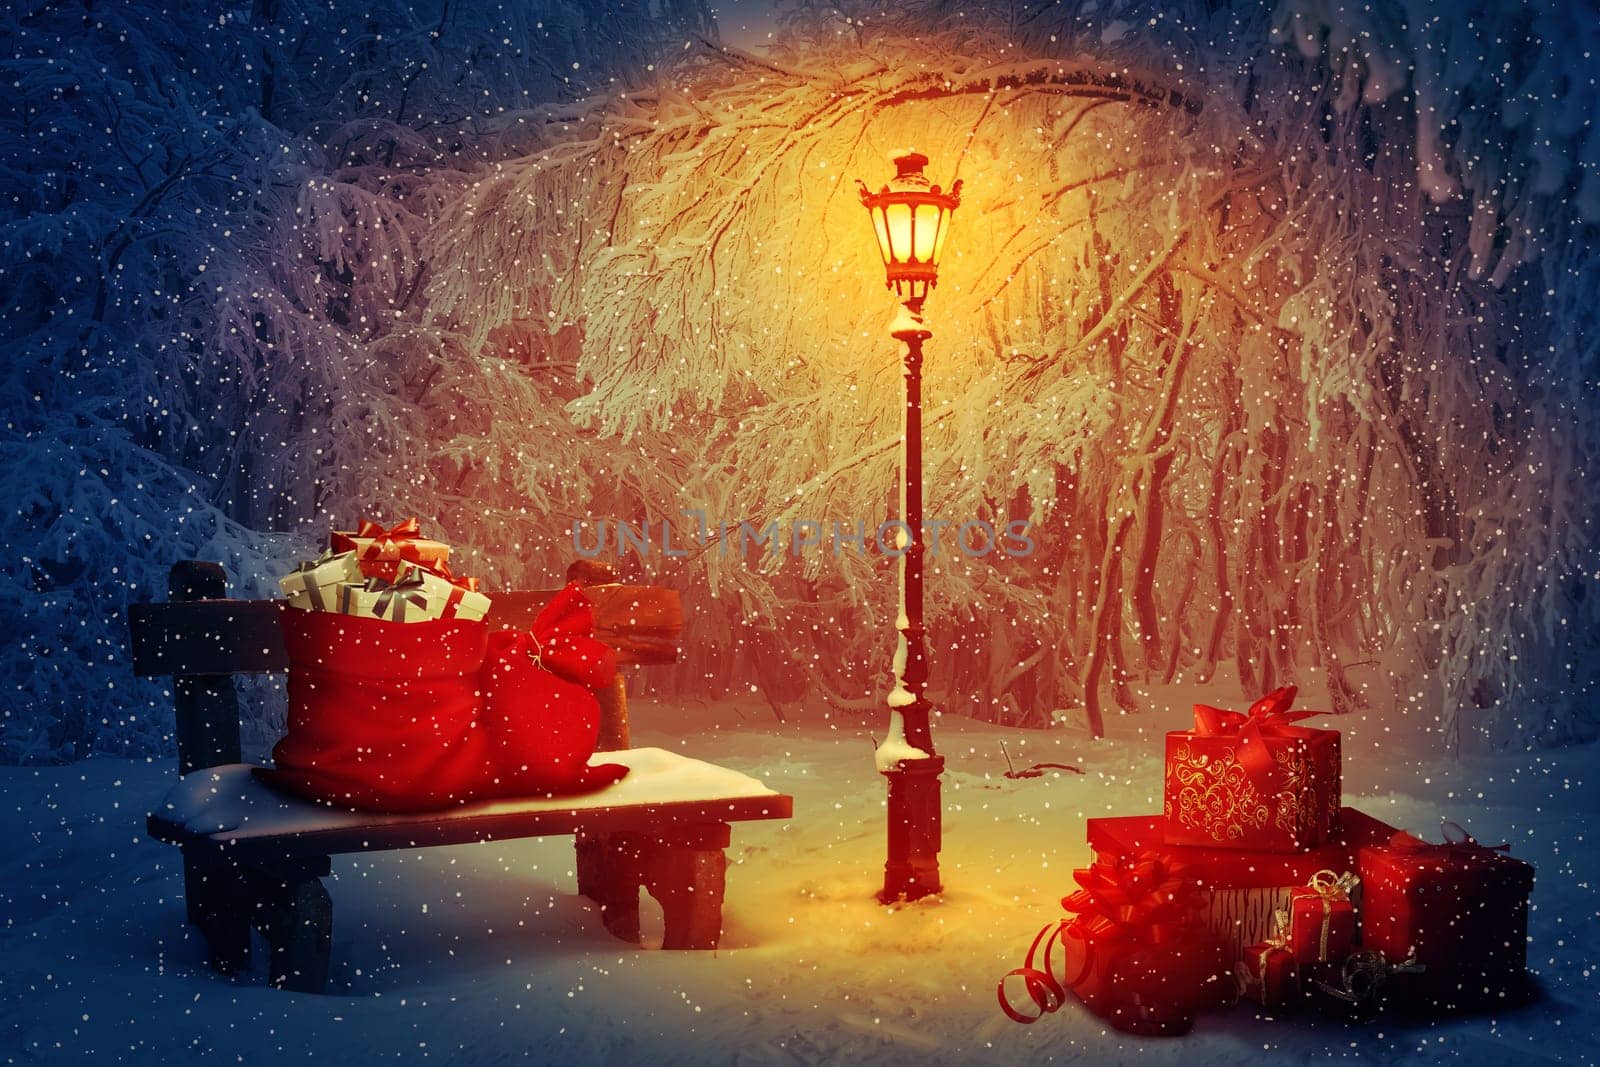 Lot of presents with Santa sacks in the park. Wooden bench and a shining lamp in the snowy night. Peaceful Christmas scene and winter holiday gifts. New Year celebration background.